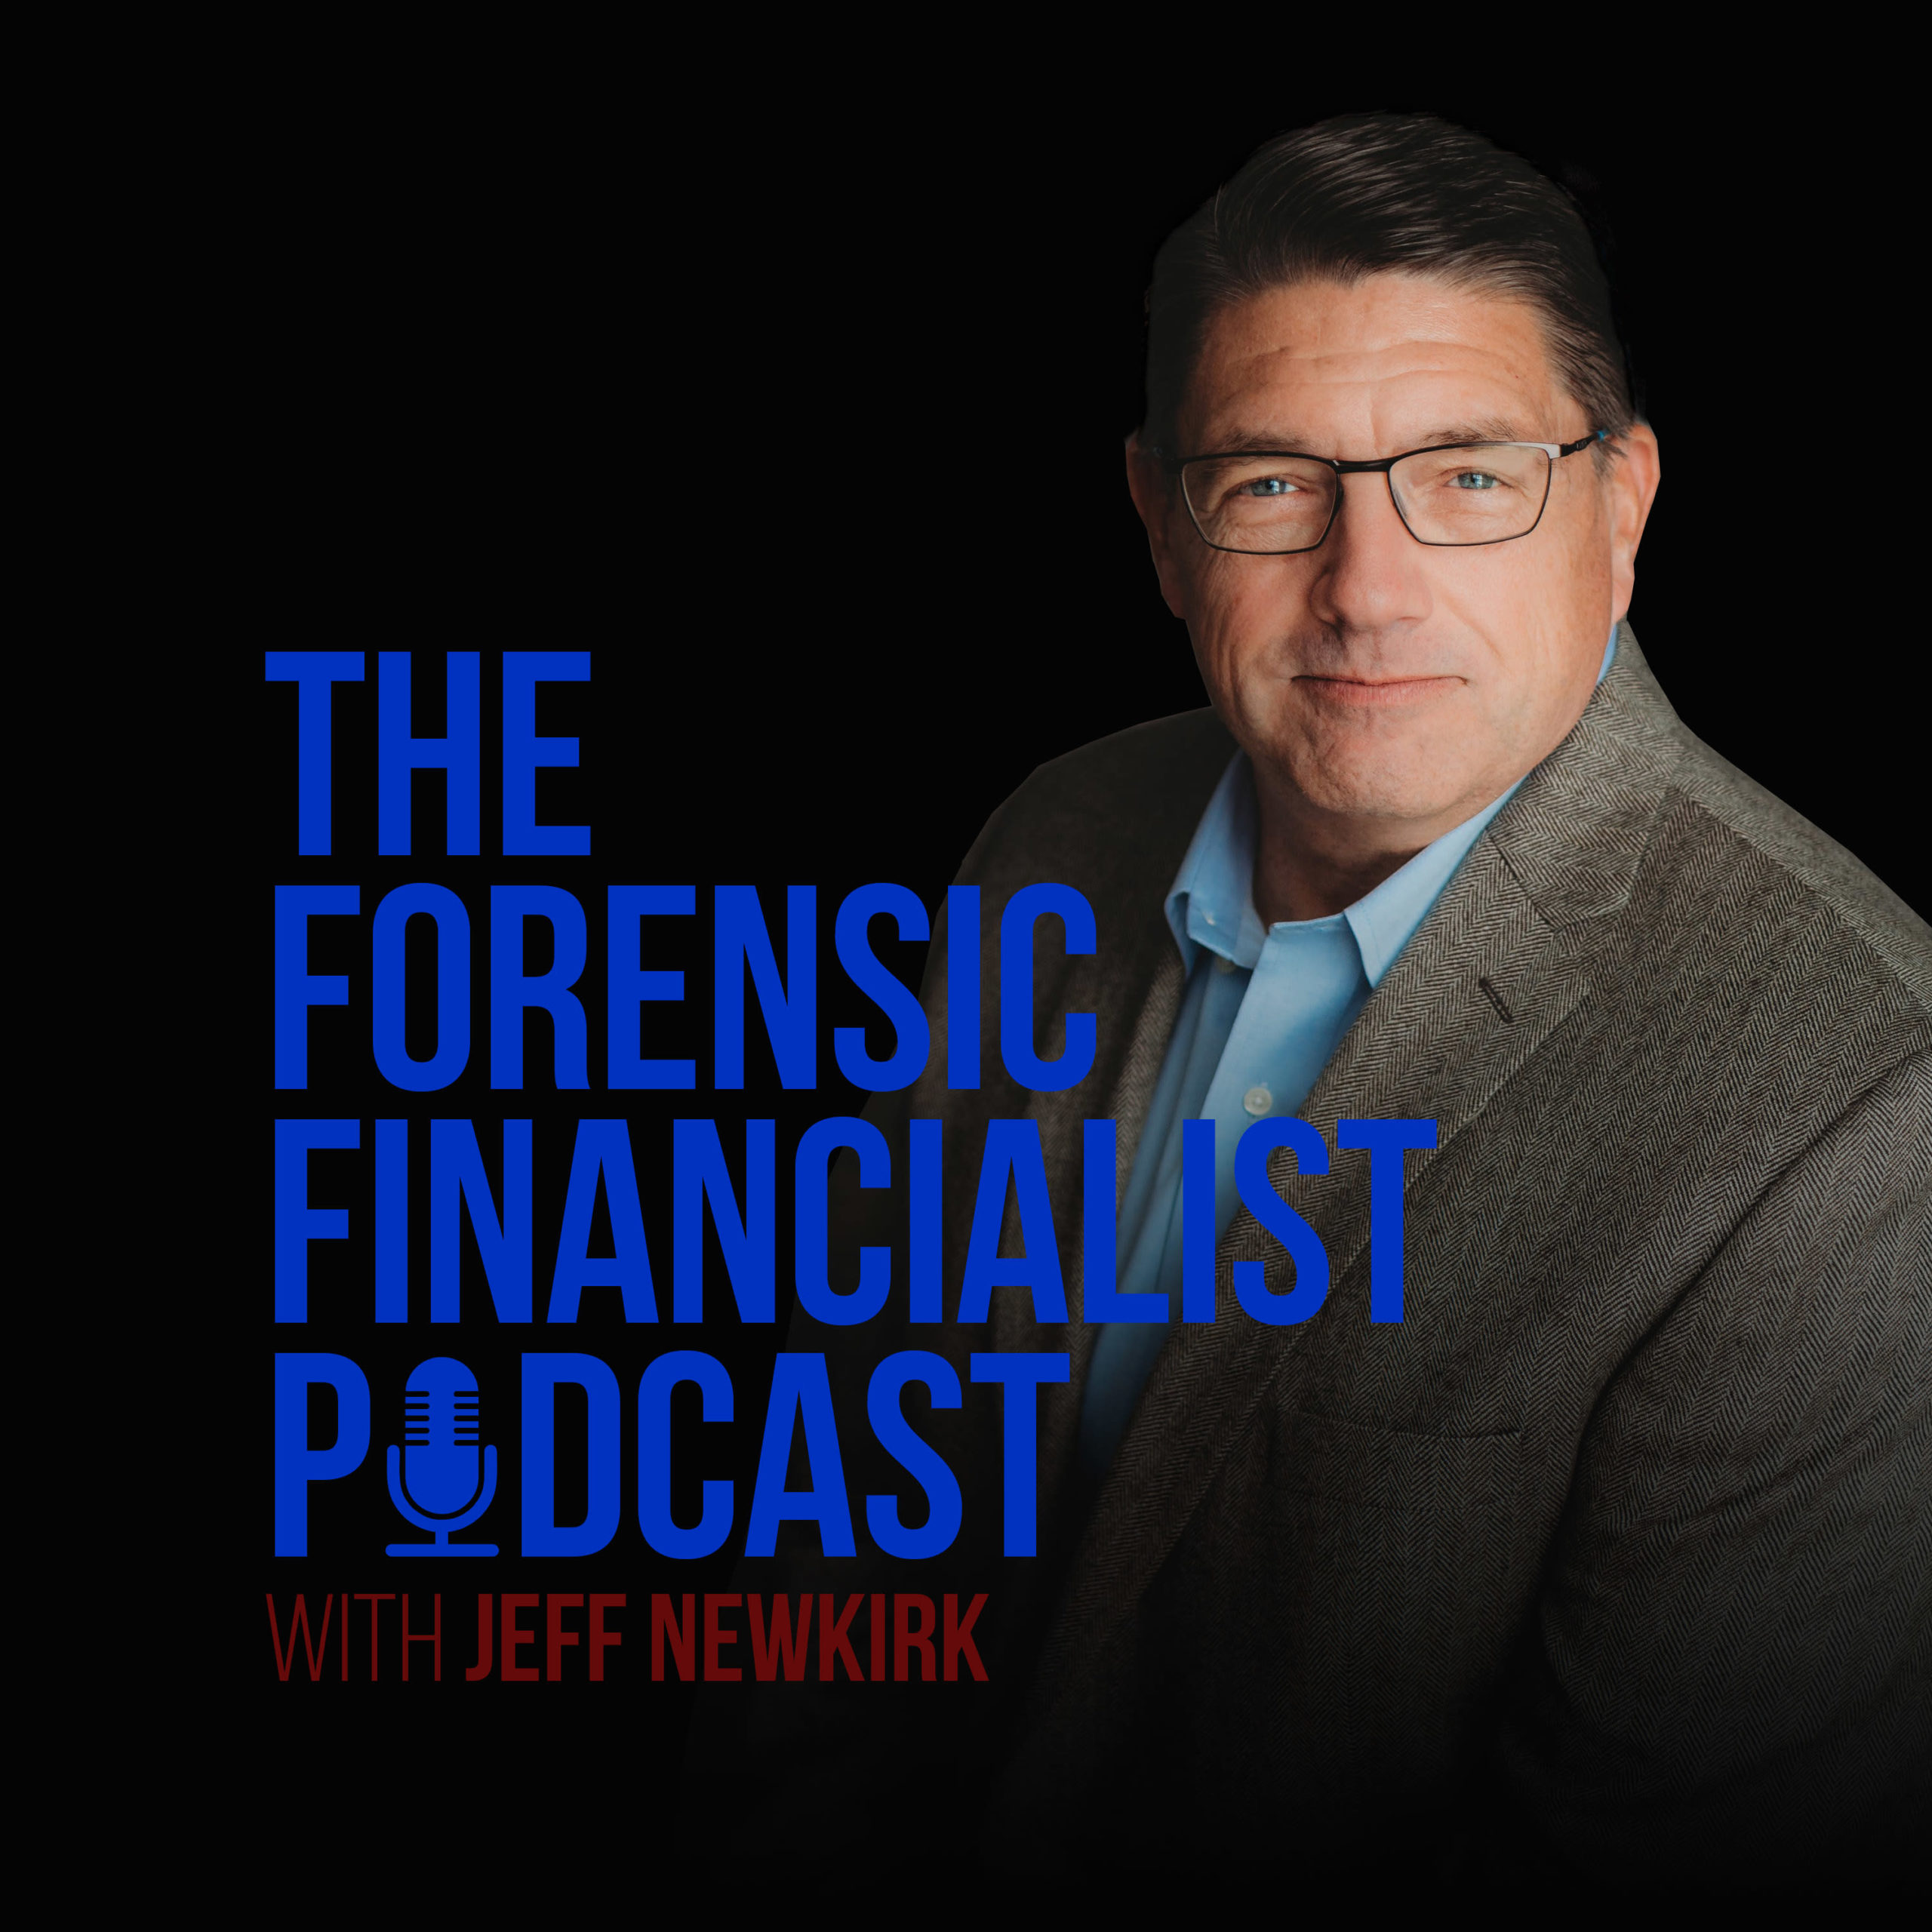 The Forensic Financialist Podcast